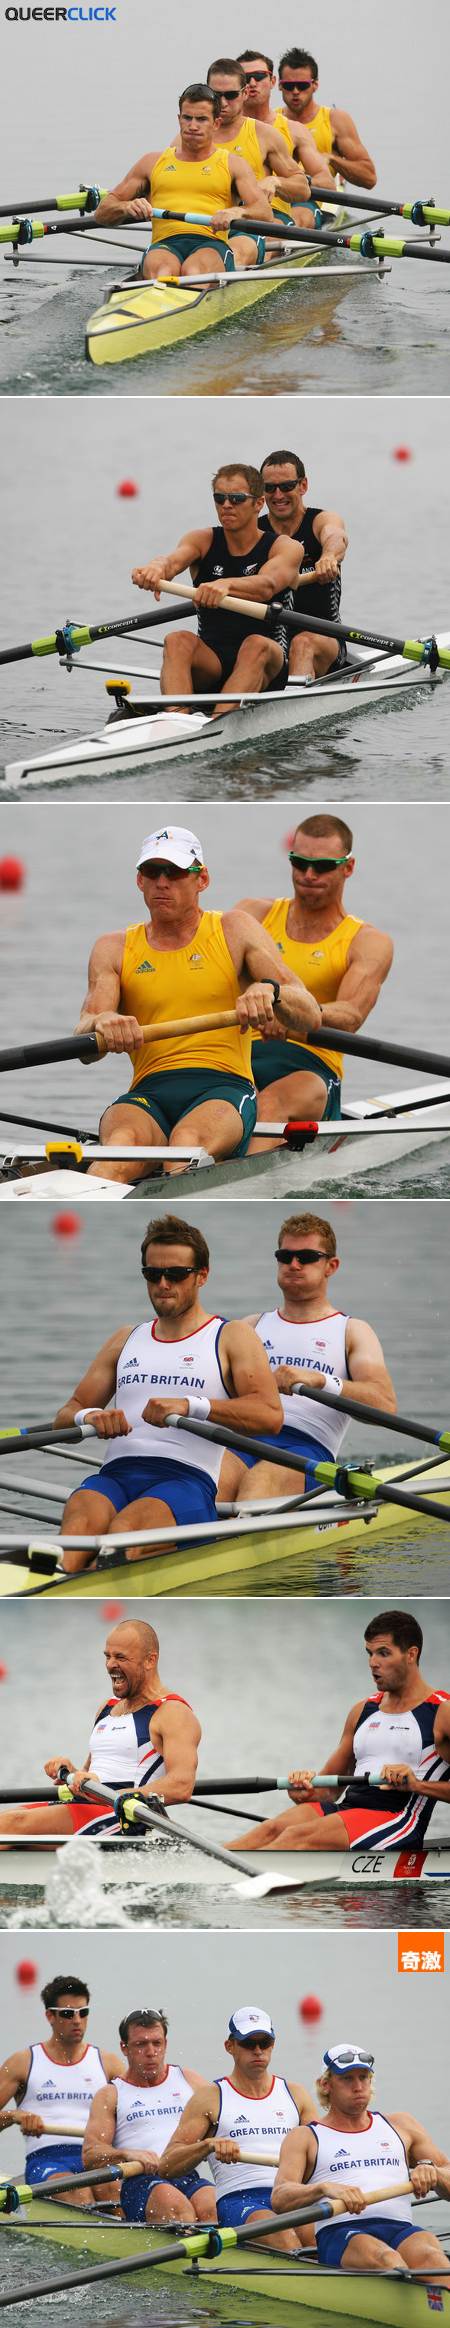 Olympic Hotties Day 5 Rowers